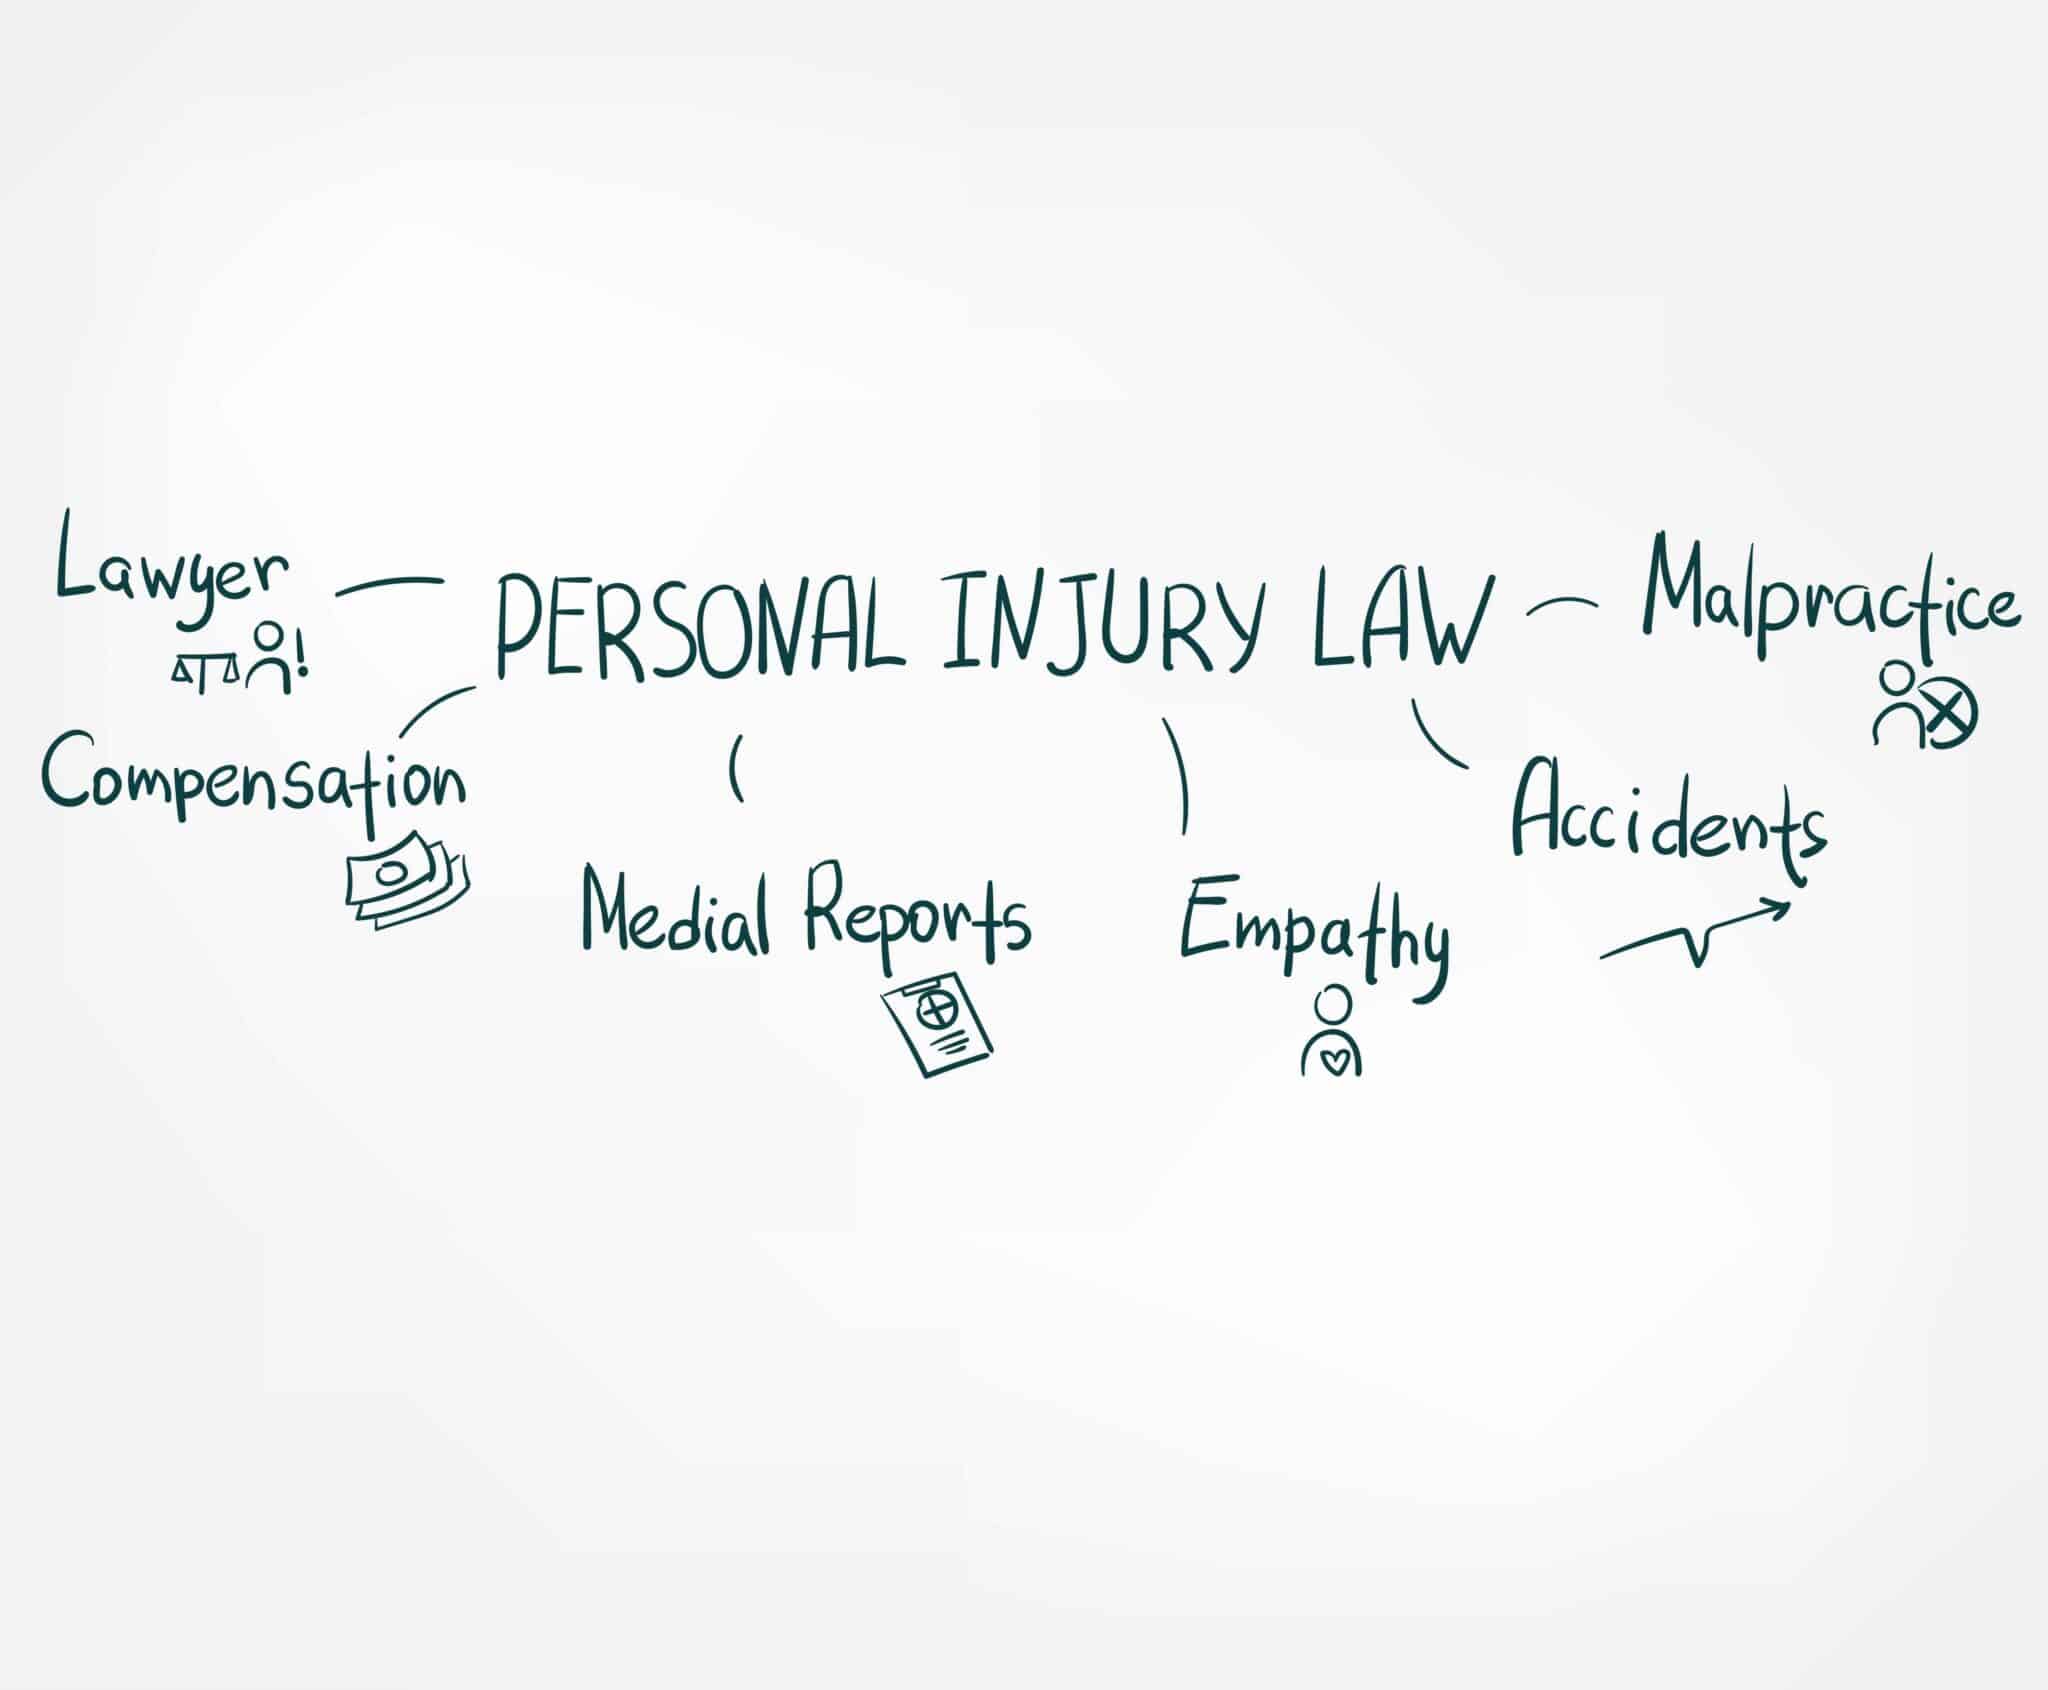 Sketch art showing elements of personal injury law: lawyer, compensation, accident, malpractice.